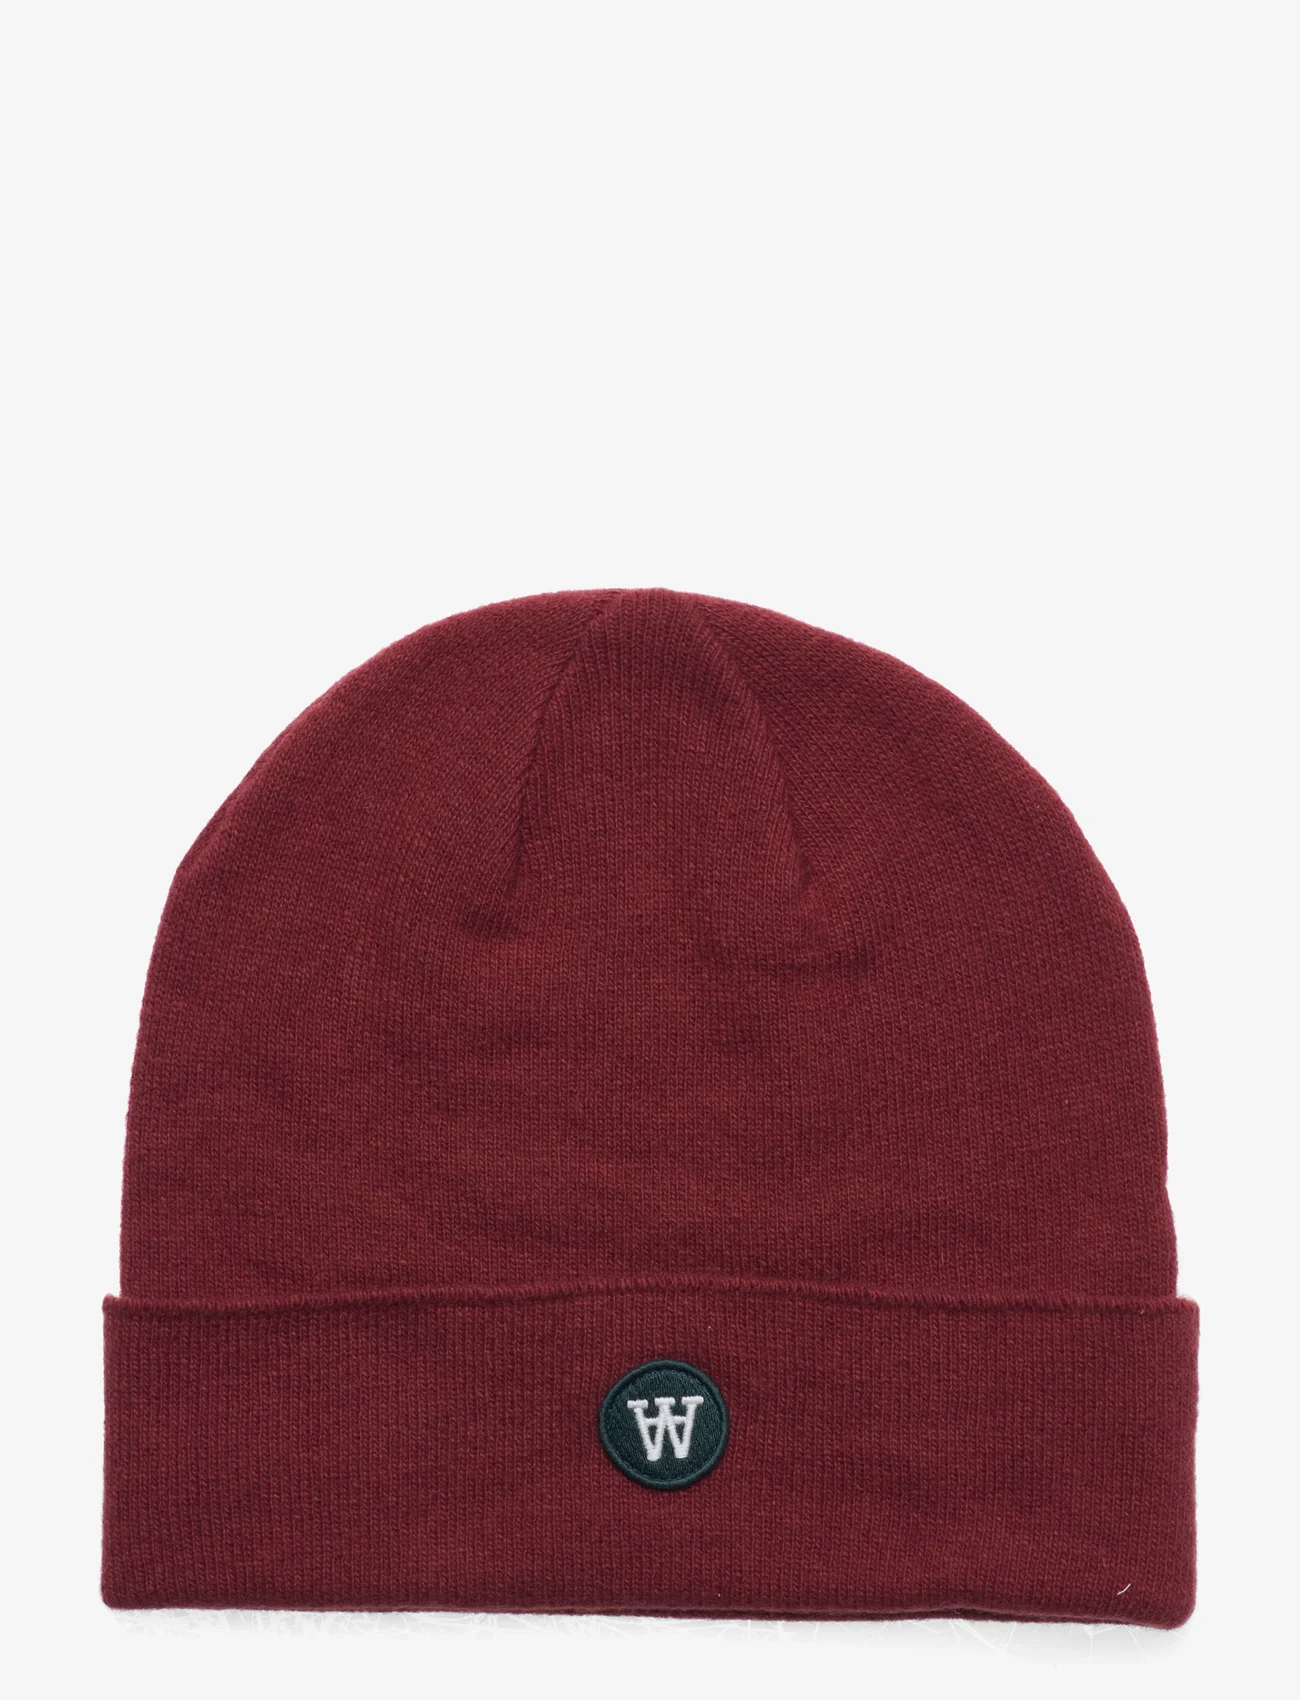 Double A by Wood Wood - Vin patch beanie - beanies - autumn red - 0